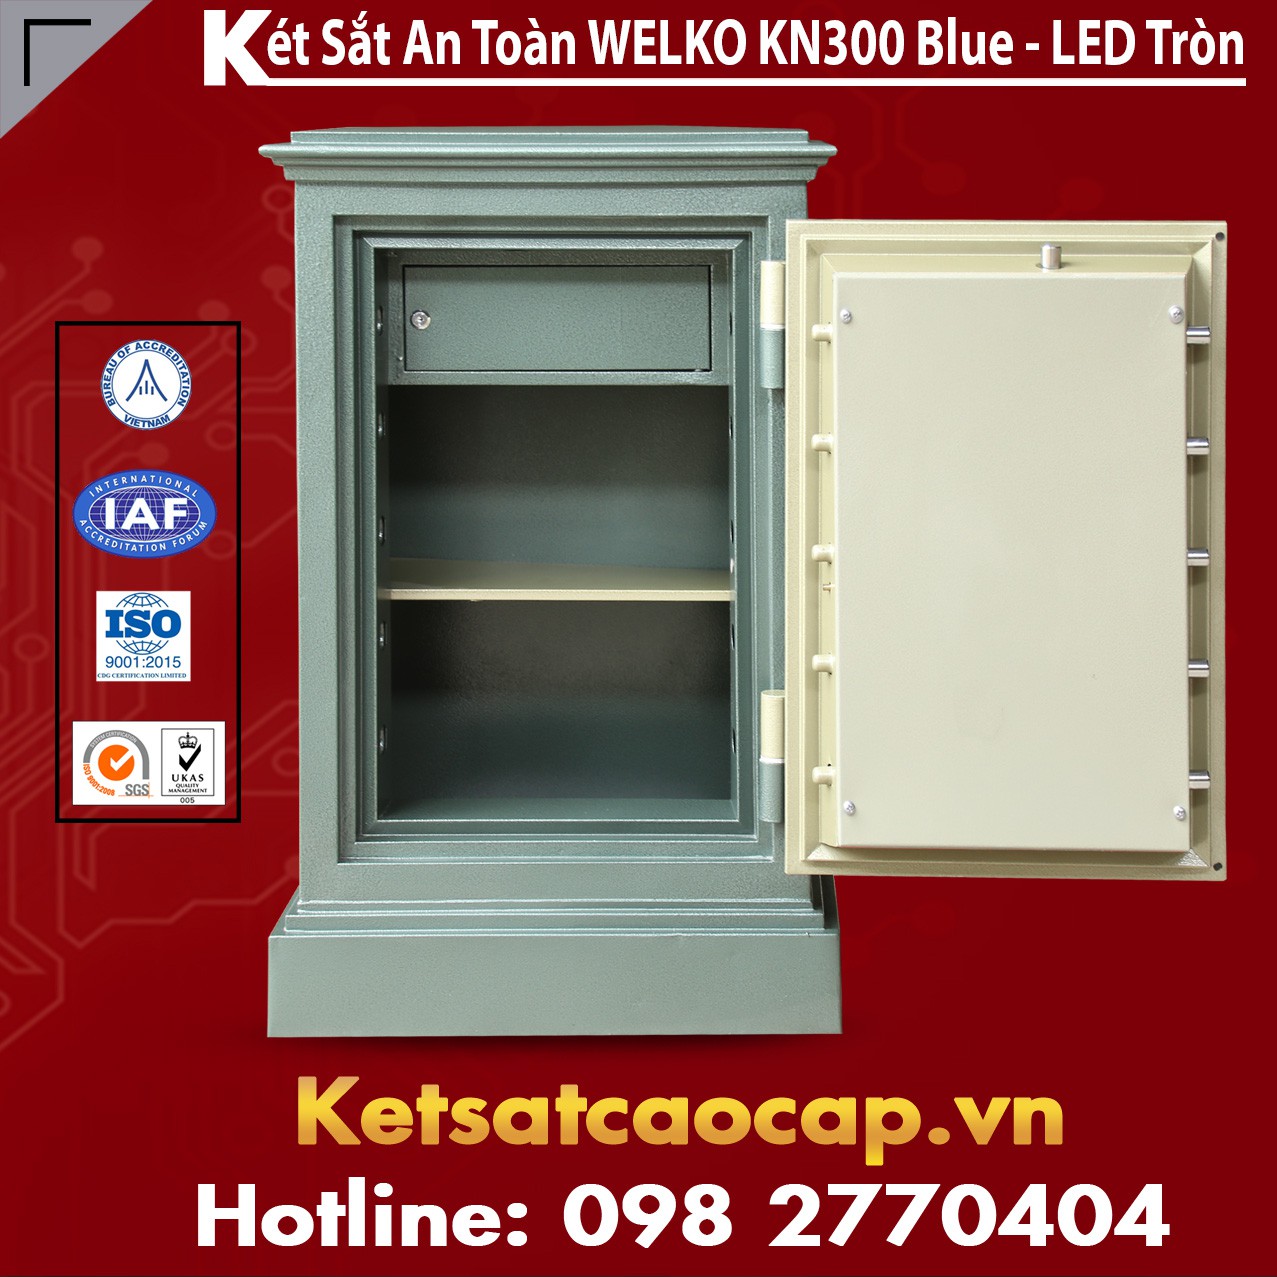 Special Safes Factory Direct & Fast Shipping Danh Sach Nha Cung Cap Ket Sat Co Lon Cao Cap